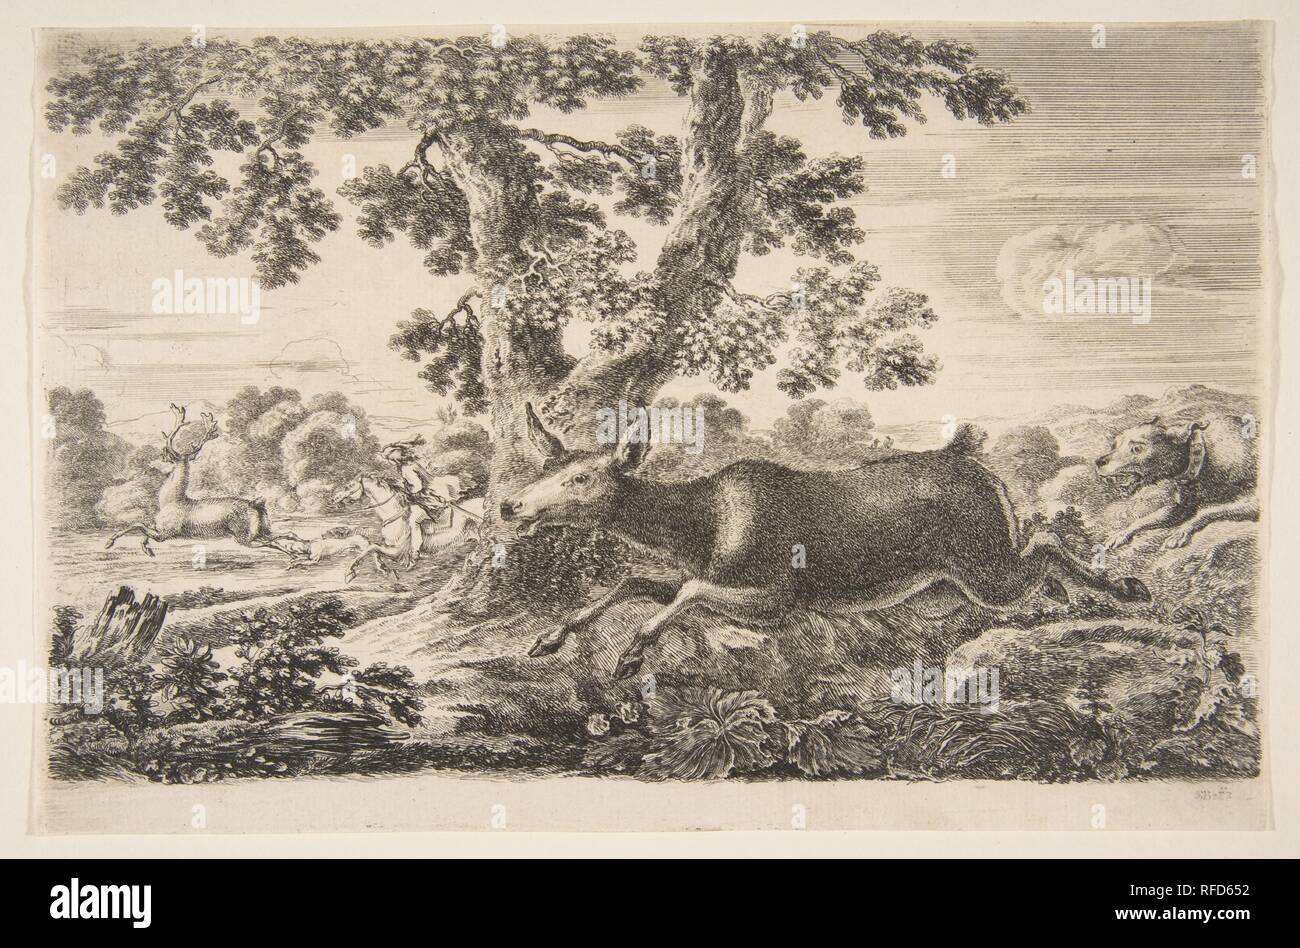 Deer hunt, from 'Animal hunts' (Chasses à différents animaux). Artist: Stefano della Bella (Italian, Florence 1610-1664 Florence). Dimensions: Sheet (trimmed to plate): 5 7/8 in. × 9 in. (15 × 22.9 cm). Series/Portfolio: 'Animal hunts' (Chasses à différents animaux). Date: ca. 1654. Museum: Metropolitan Museum of Art, New York, USA. Stock Photo